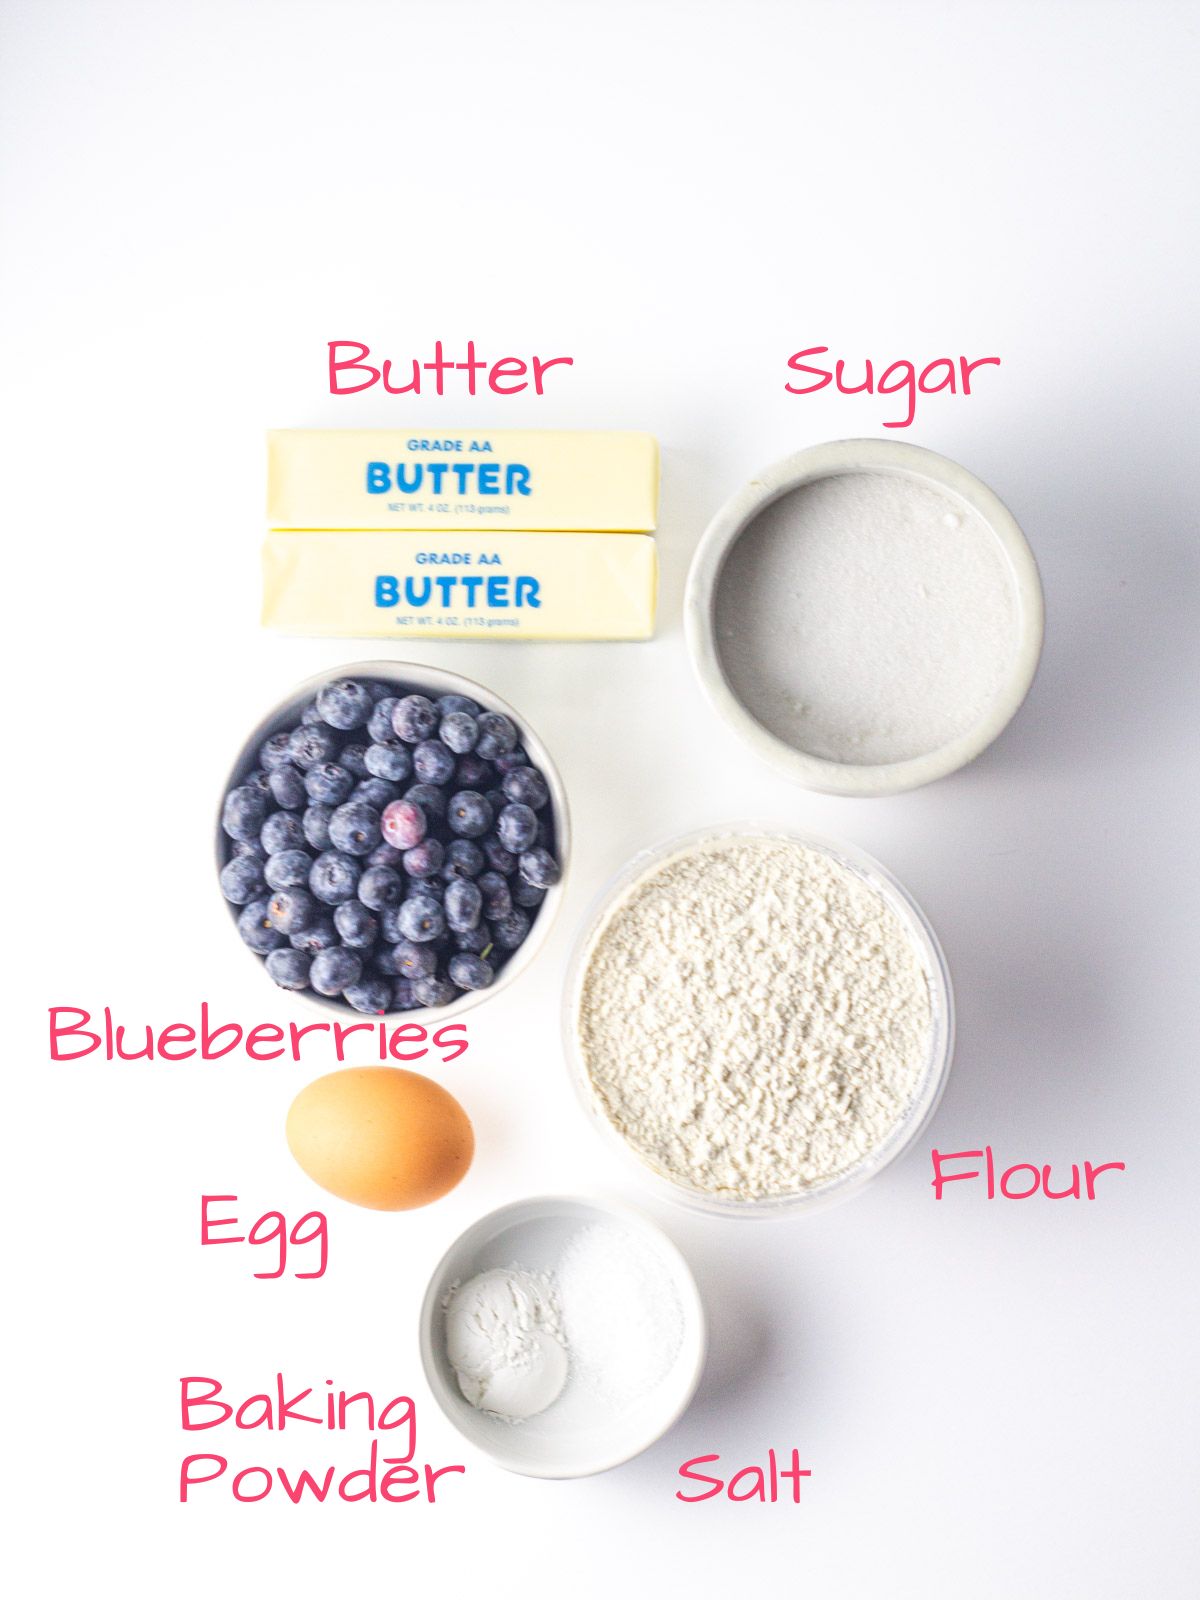 Ingredients needed to make Blueberry Cookies.